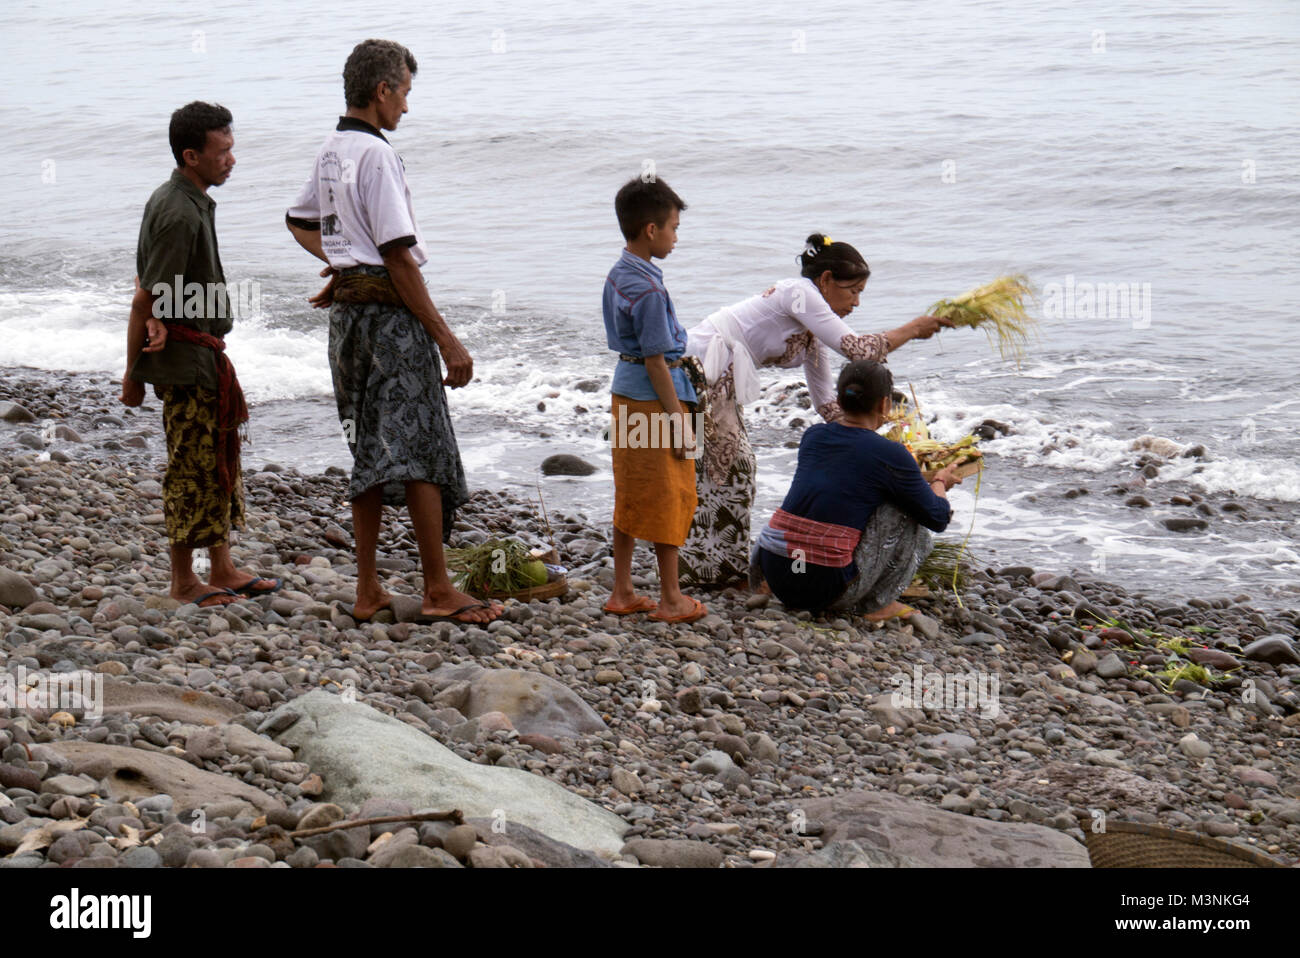 Balinese people bury their dead in a traditional cremation ceremony Stock Photo